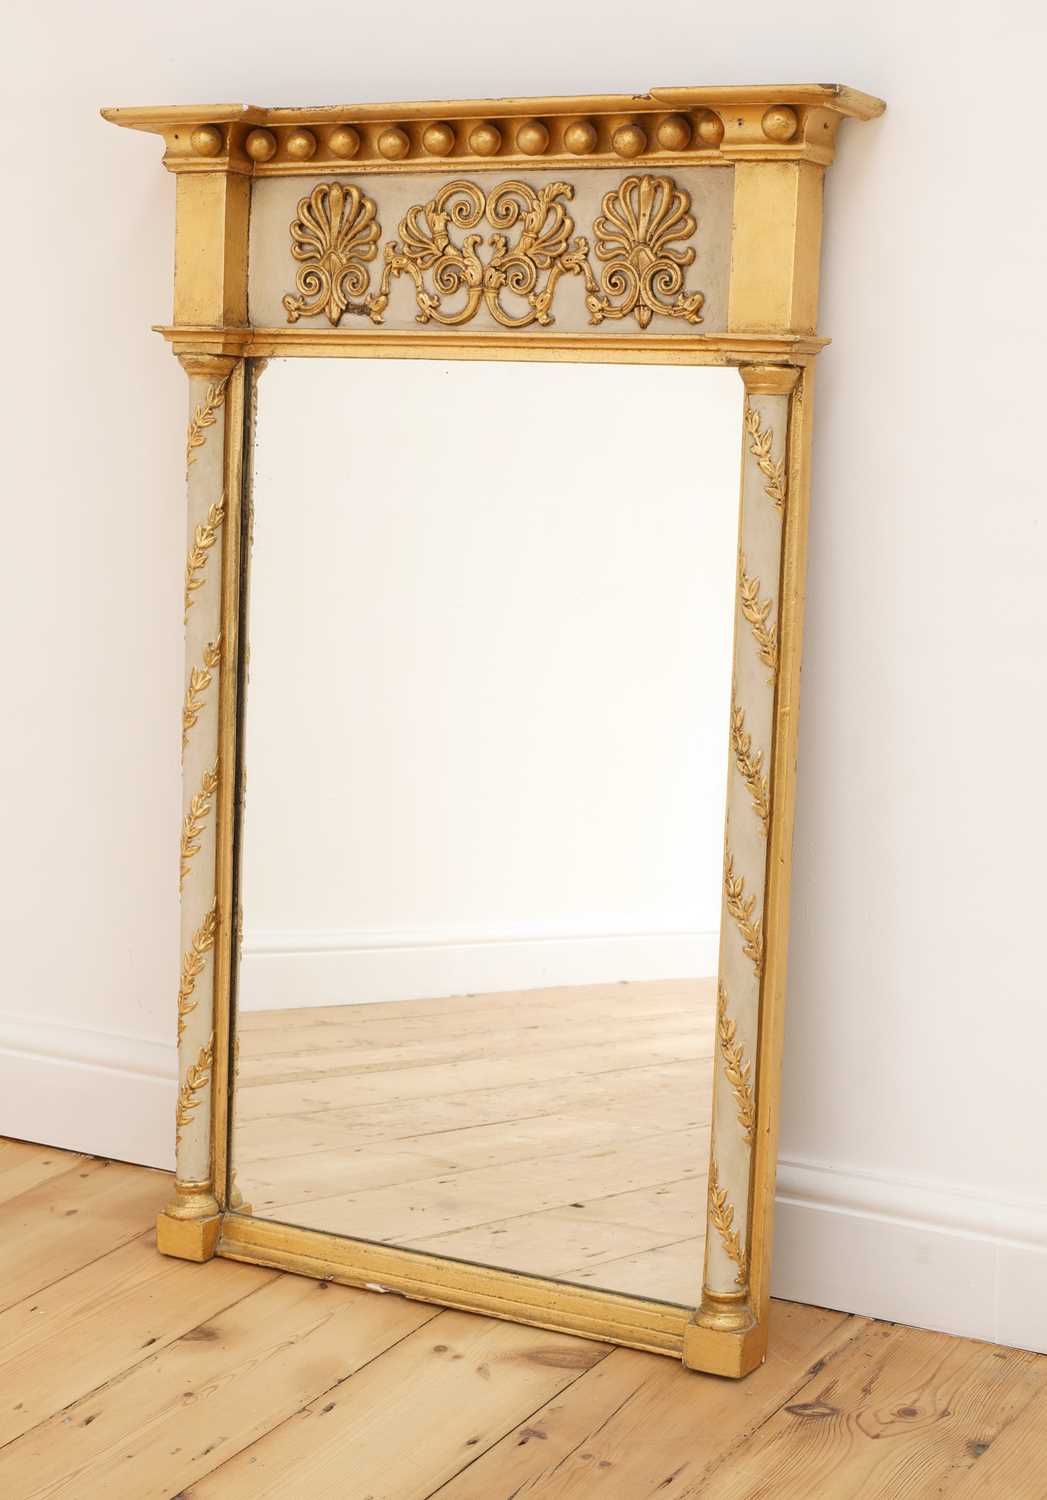 Lot 74 - A Regency-style gilt and painted pier mirror